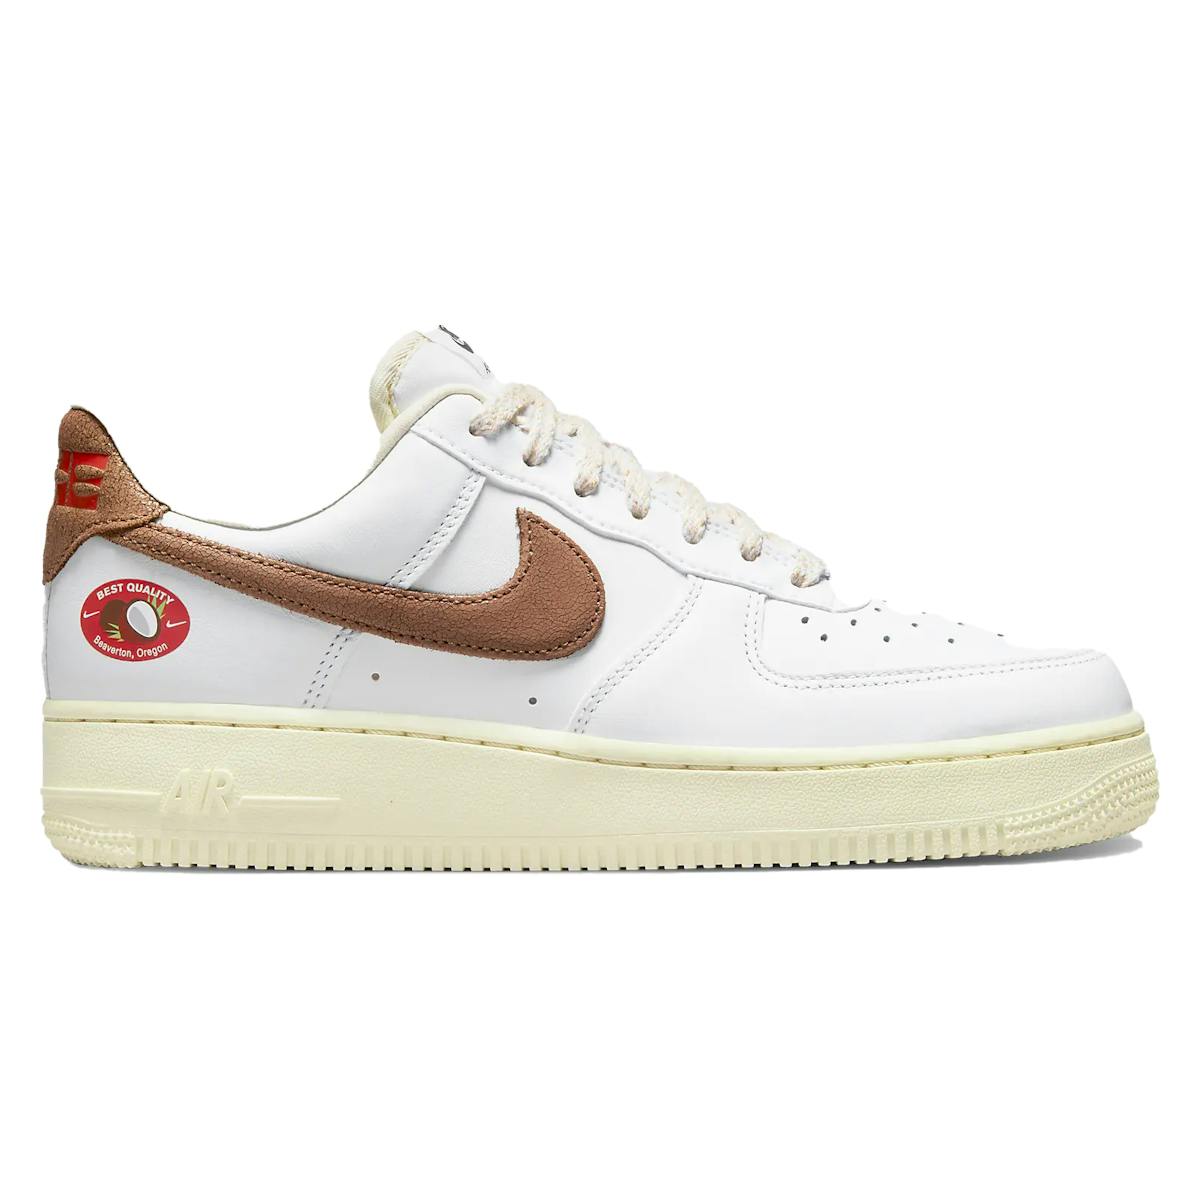 Nike WMNS AIR FORCE 1 '07 LX "Coconut"